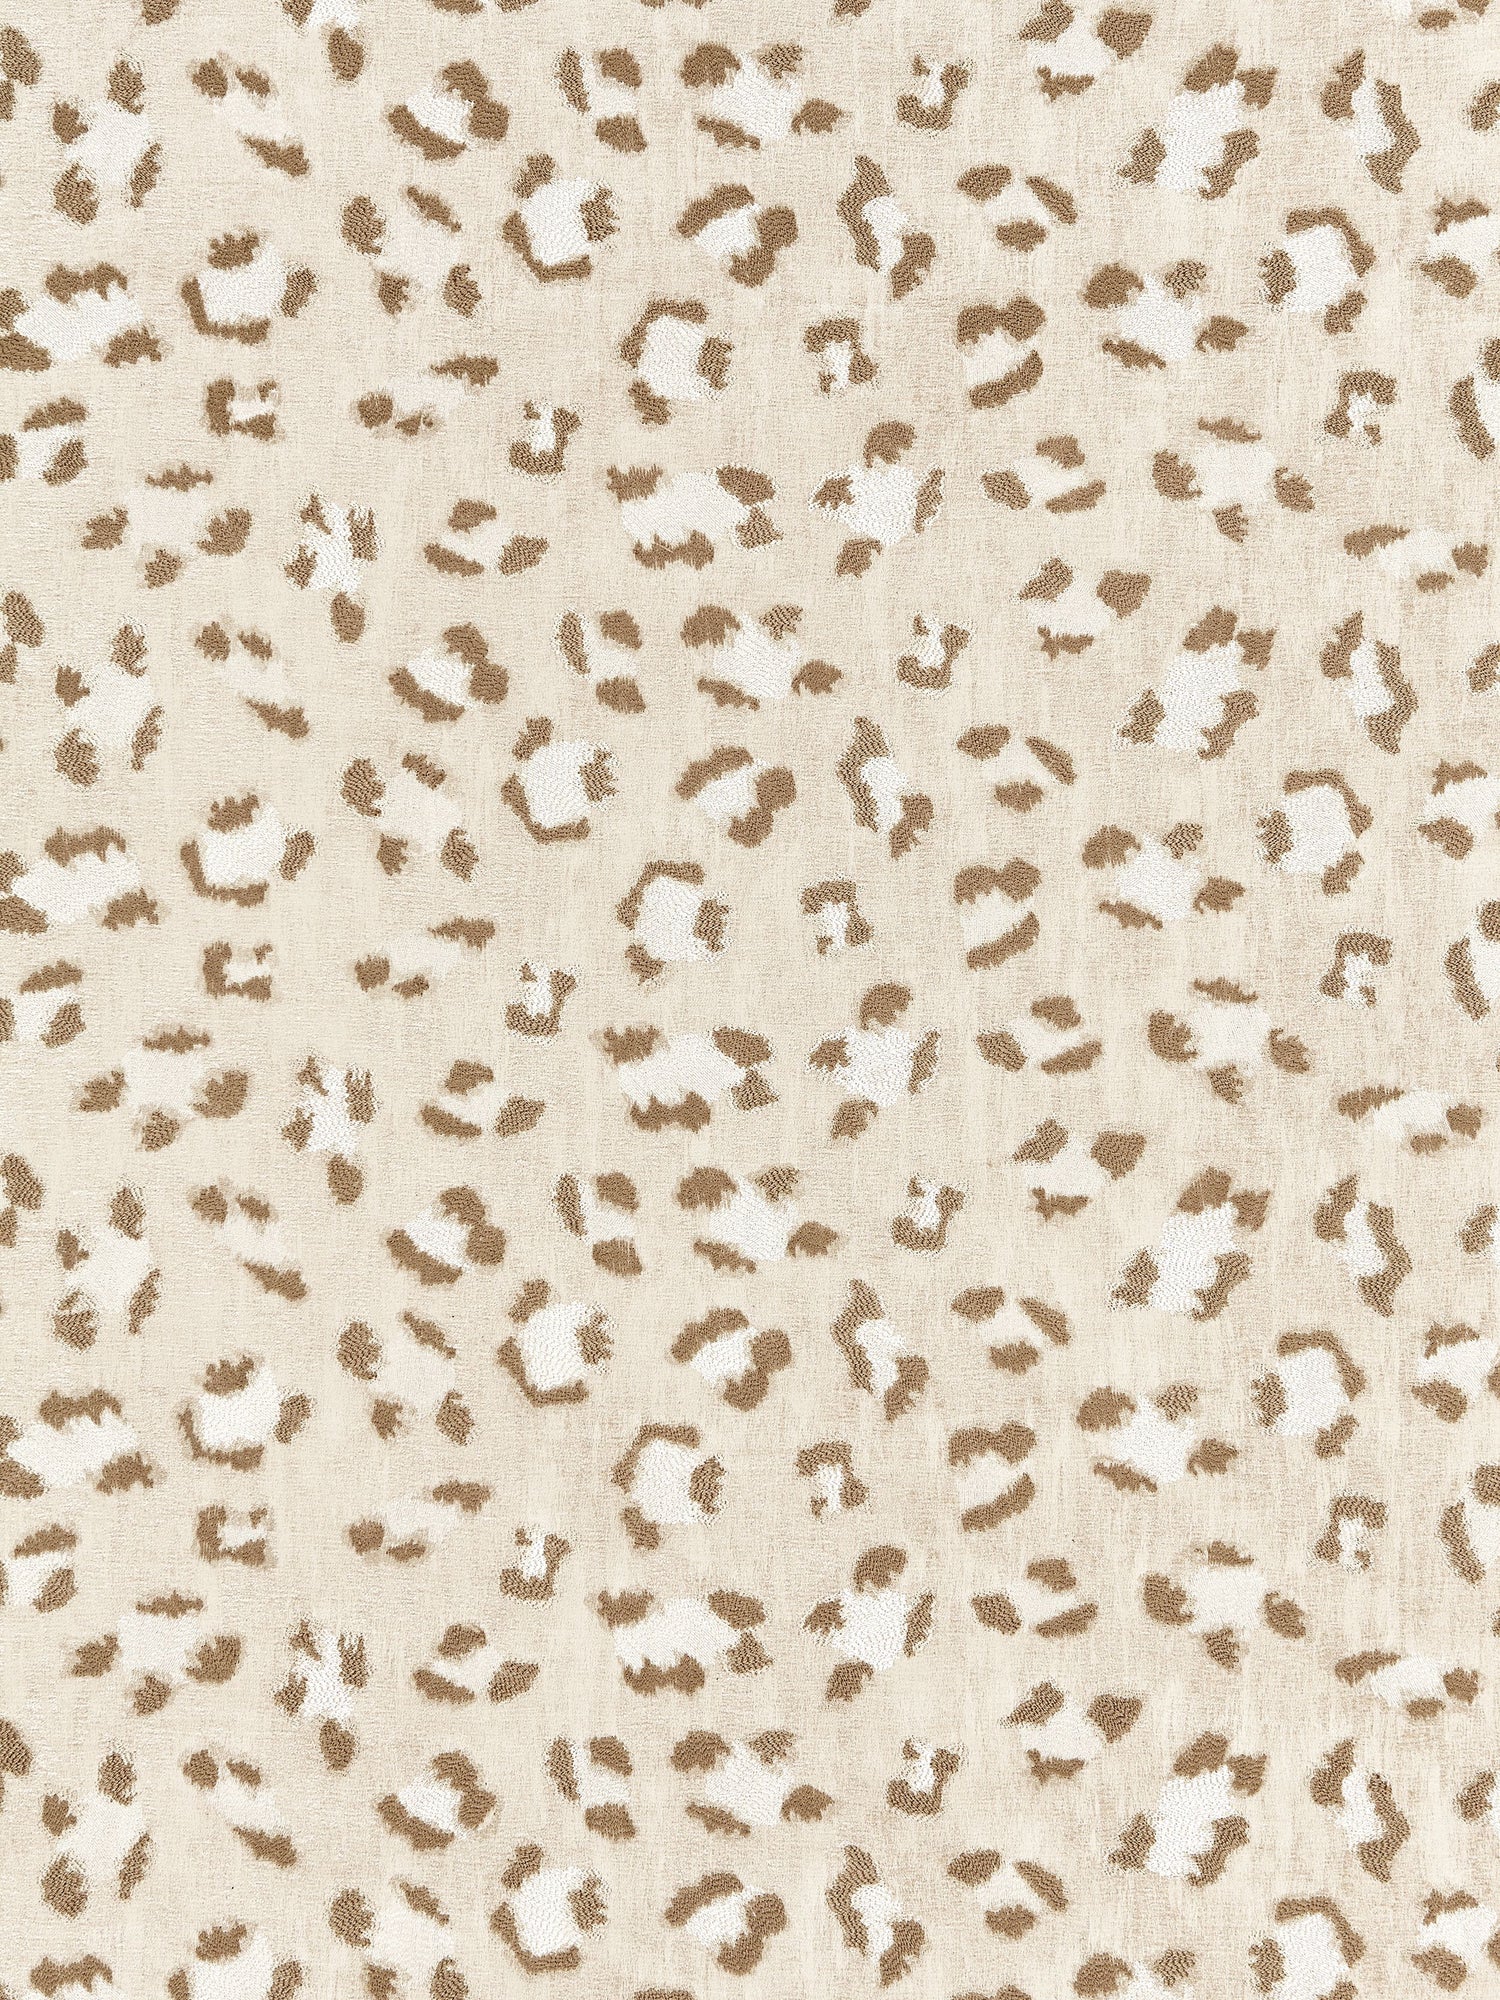 Broderie Leopard fabric in camel on cream color - pattern number SC 000127075 - by Scalamandre in the Scalamandre Fabrics Book 1 collection